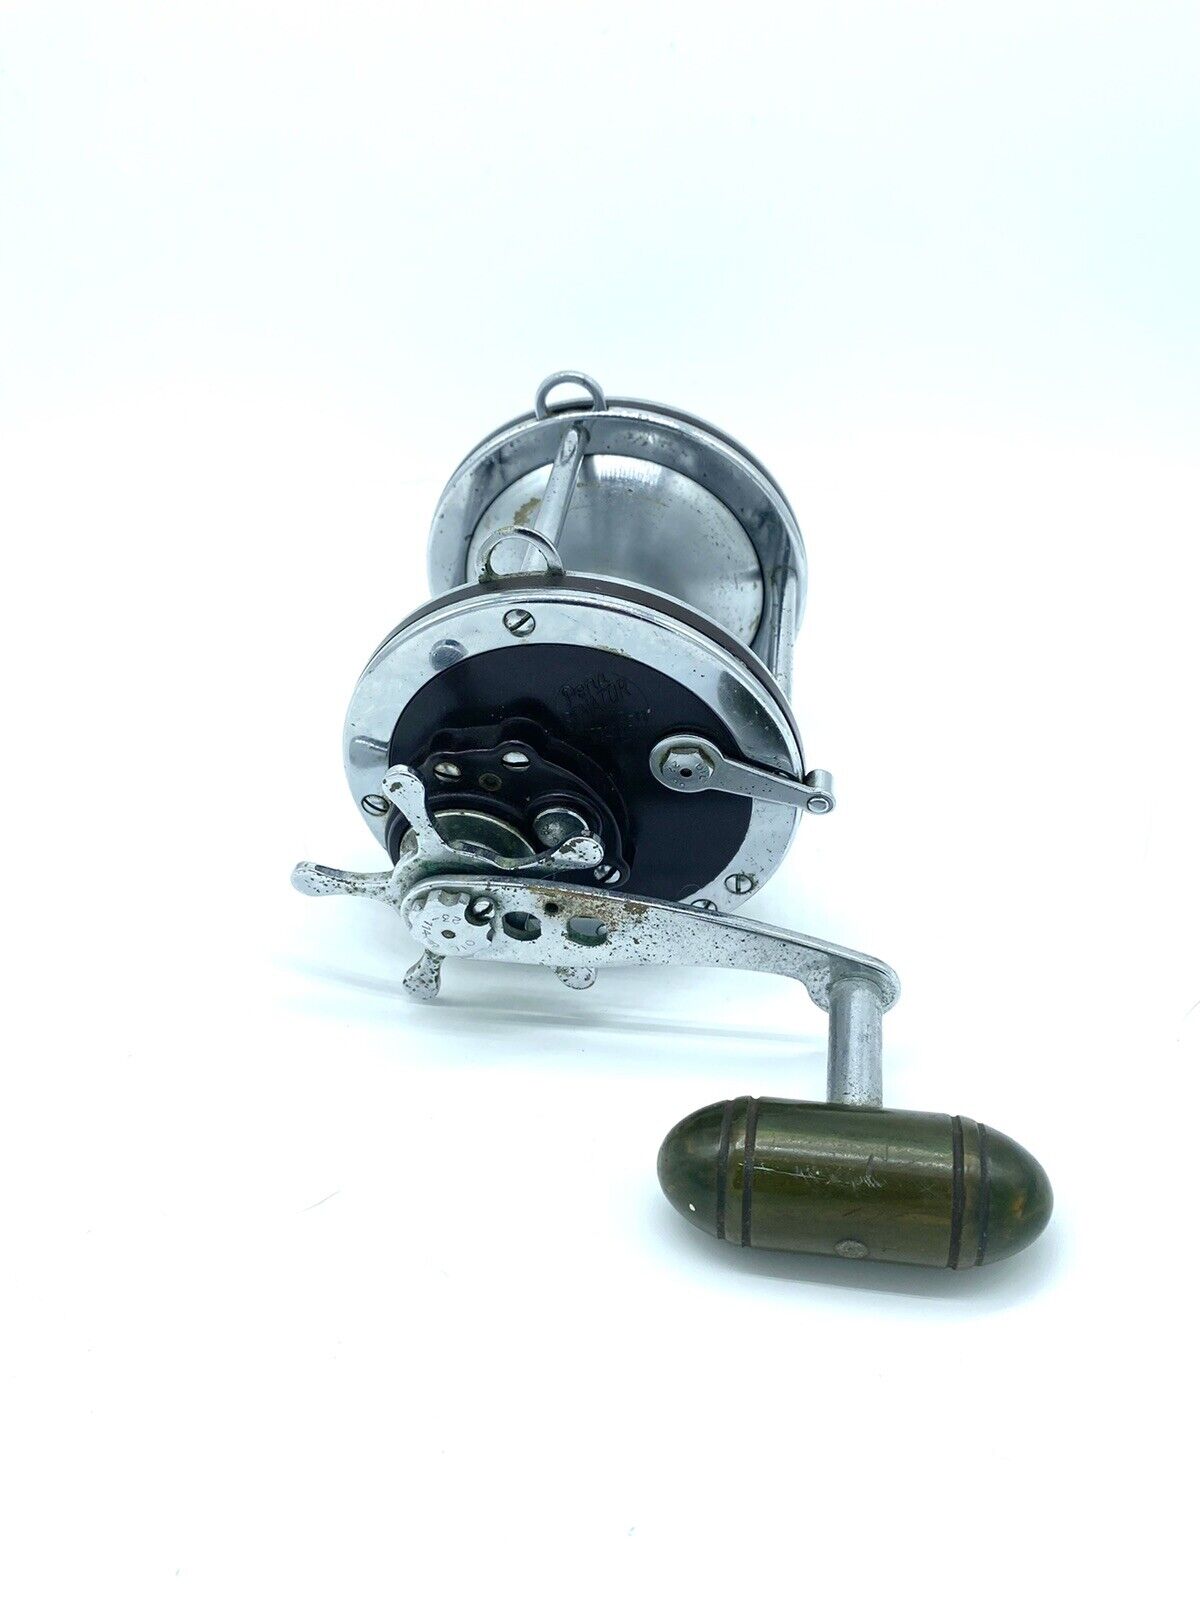 Penn 113H Special Maroon 4/0 Senator conventional fishing reel W/Power  Handle for Sale - Celebrity Cars Blog